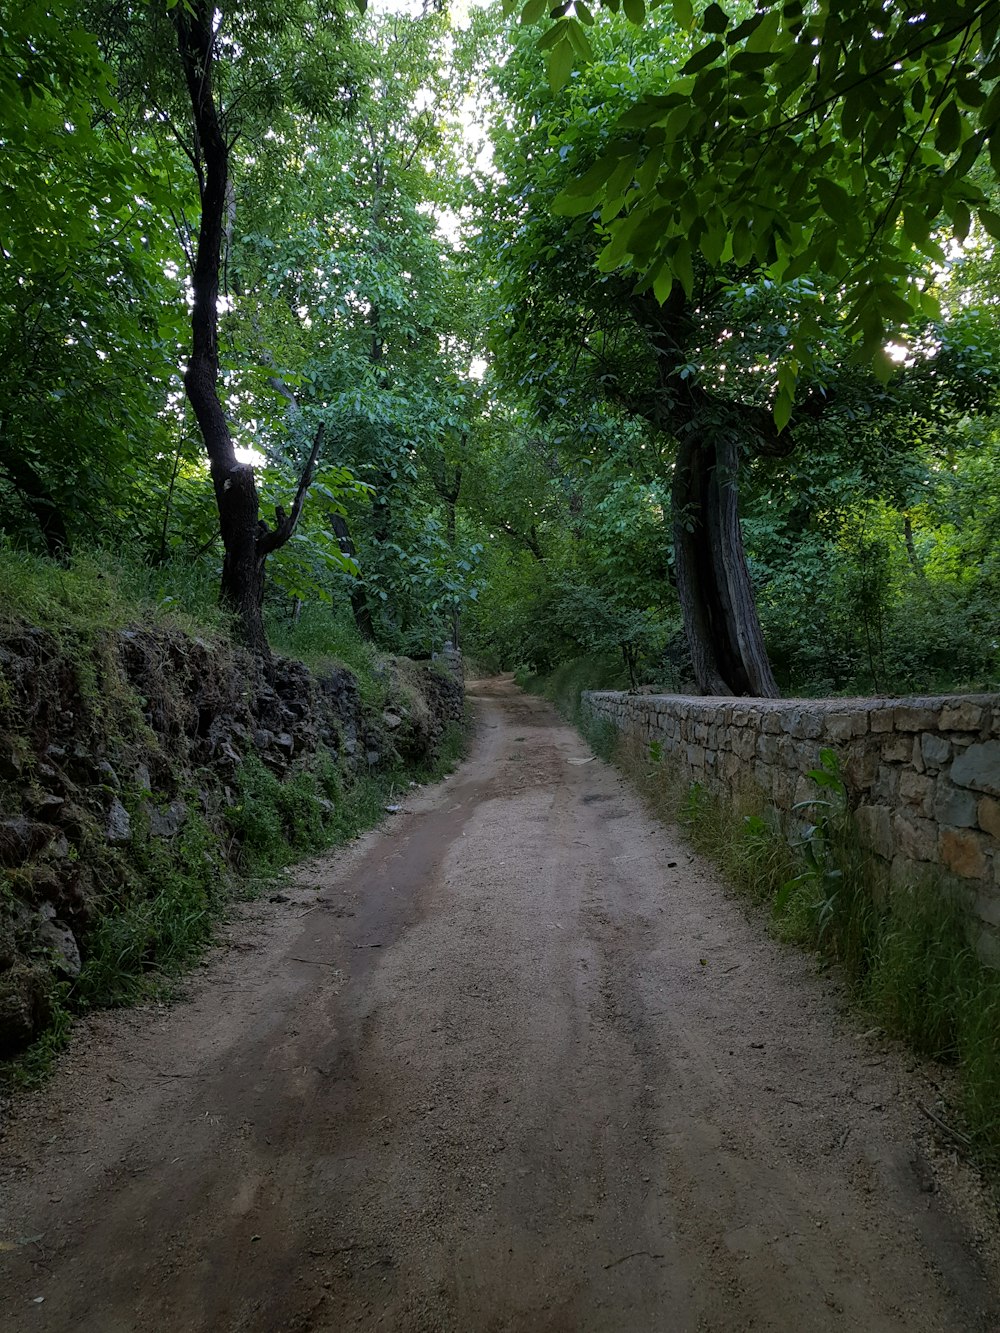 a dirt road surrounded by trees and a stone wall